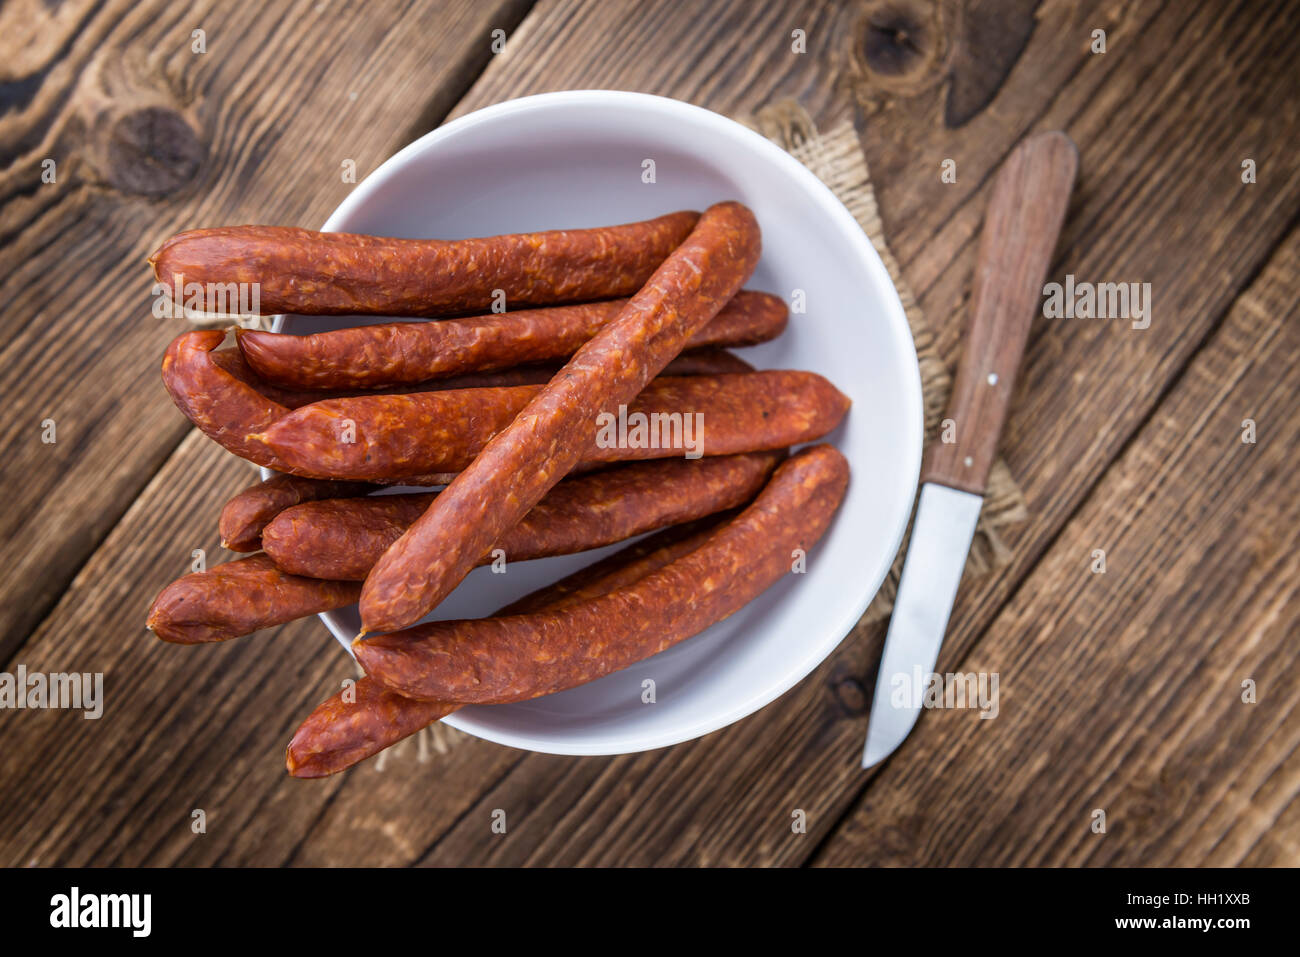 Chilli flavoured Sausages (German Mettwurst) on wooden background (selective focus) Stock Photo